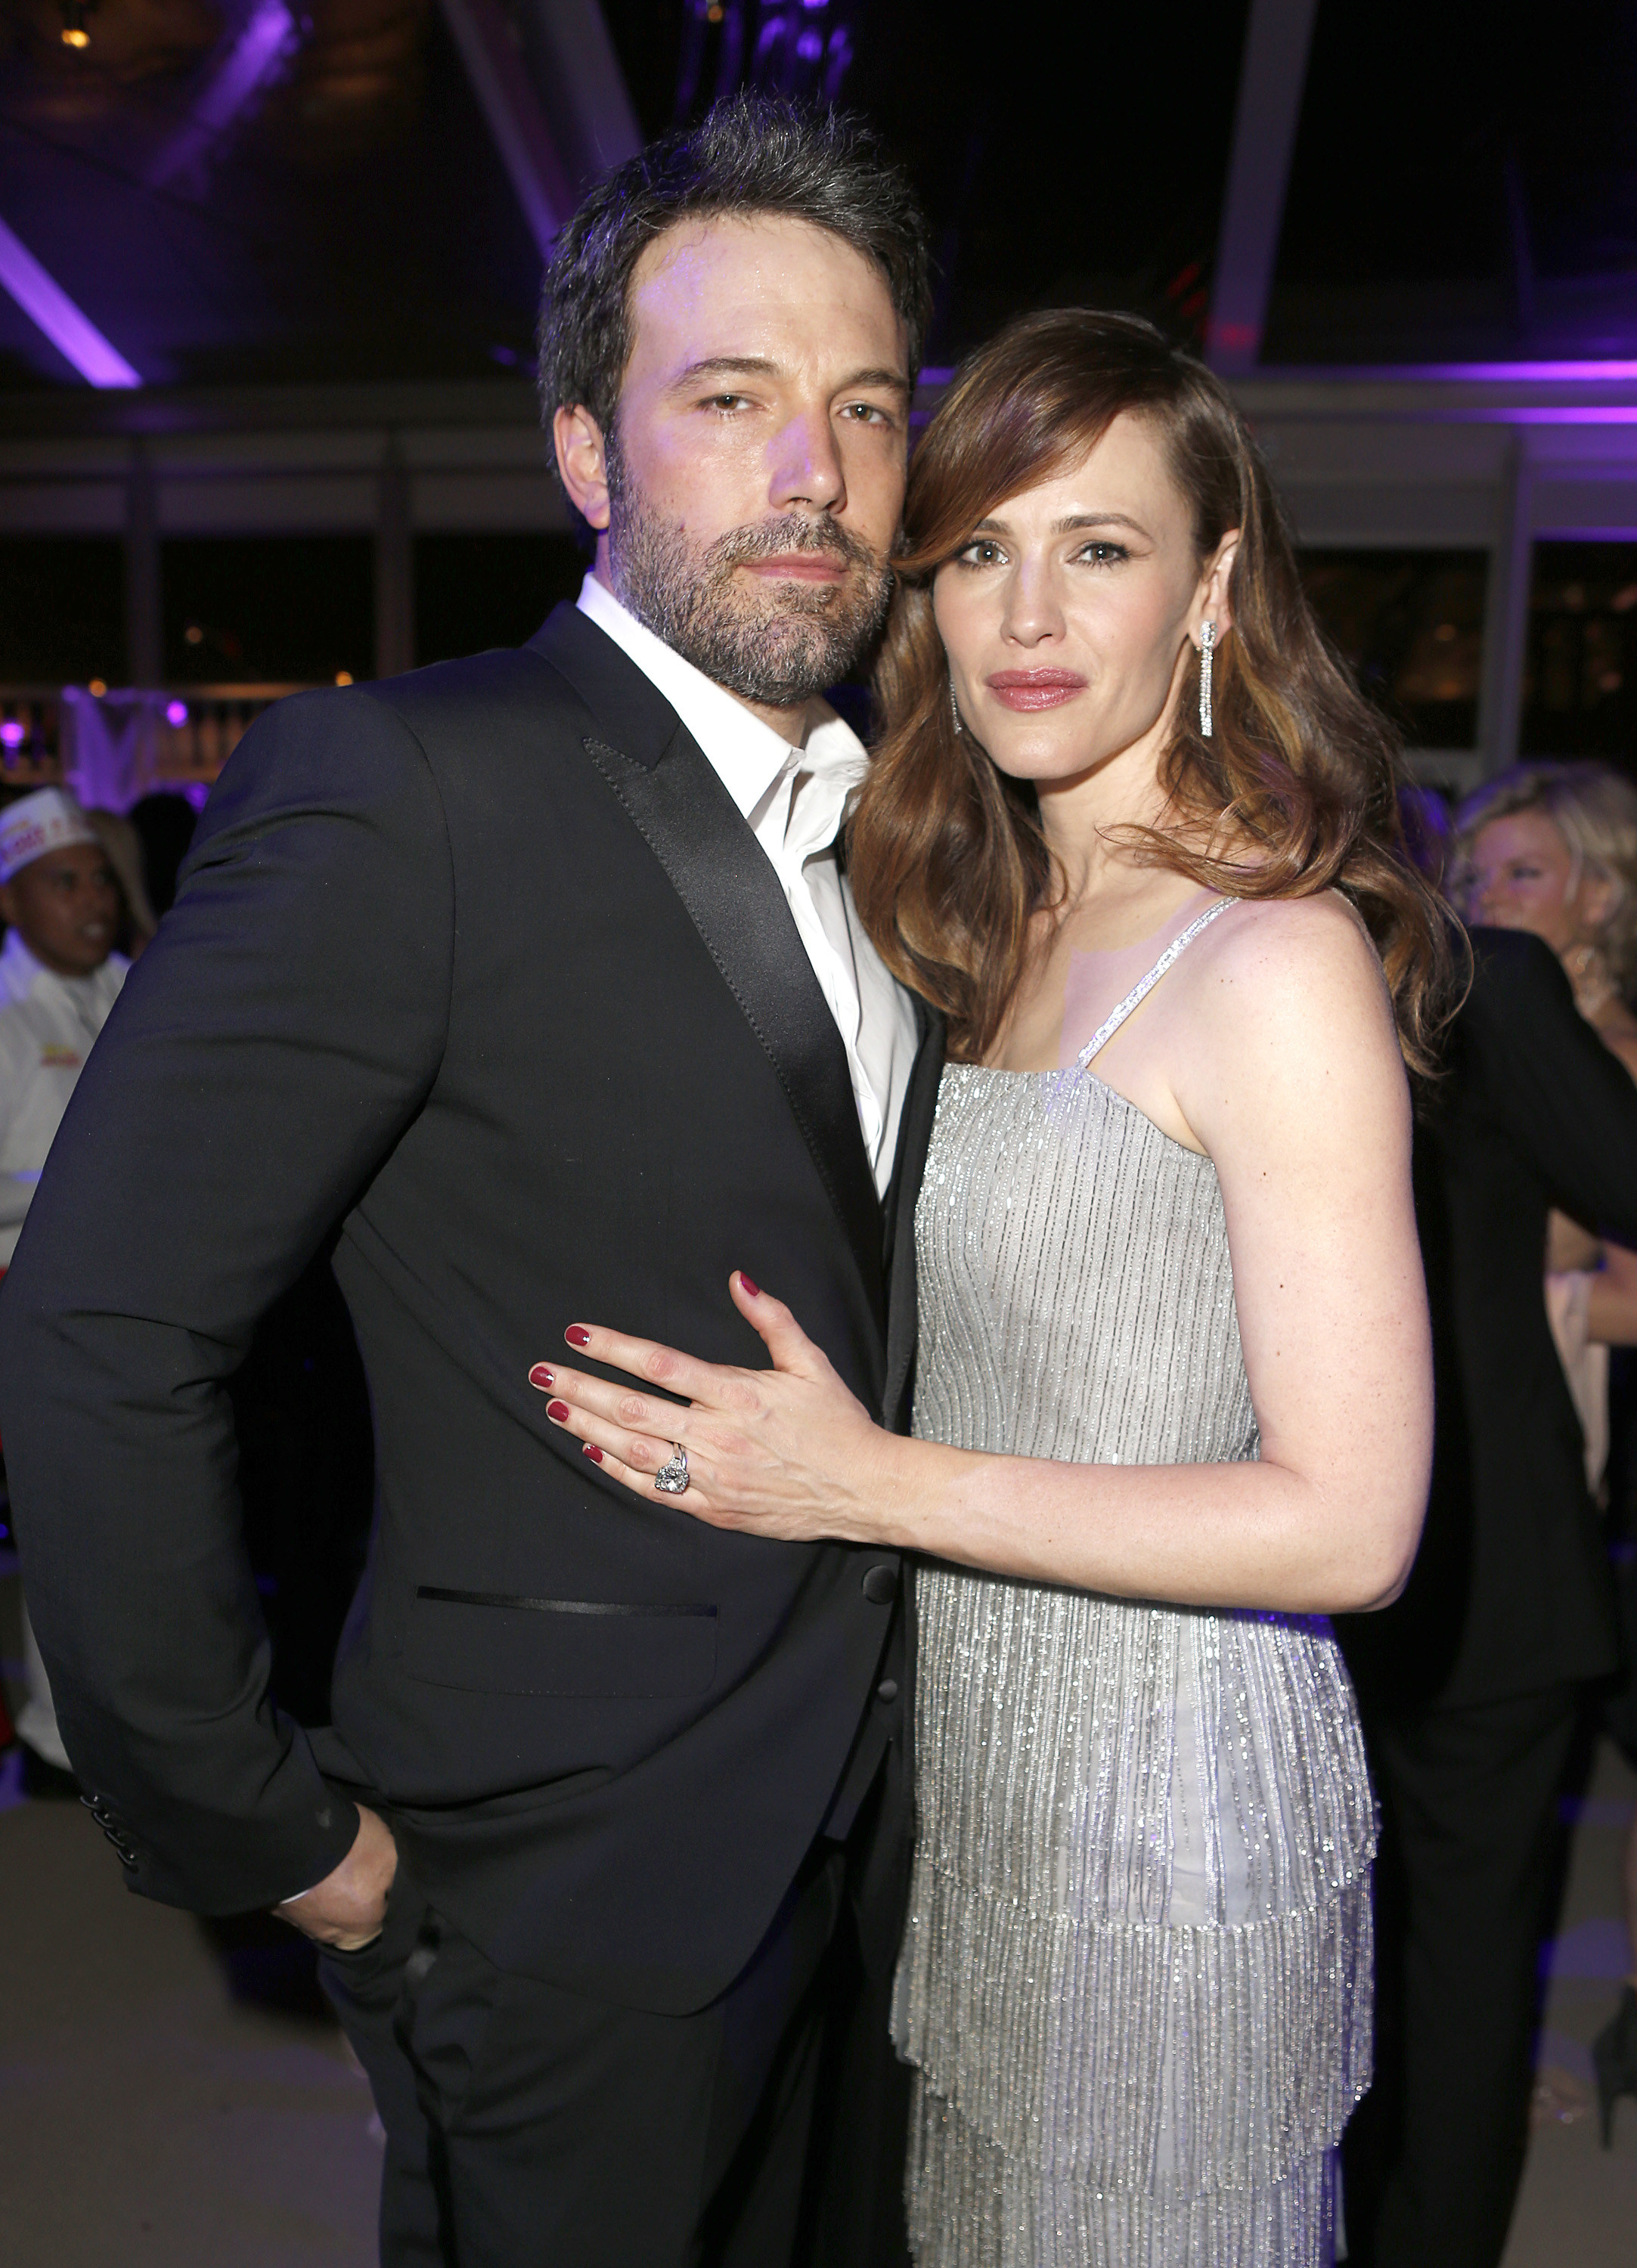 Affleck poses for a picture with Garner&#x27;s hand on his waist